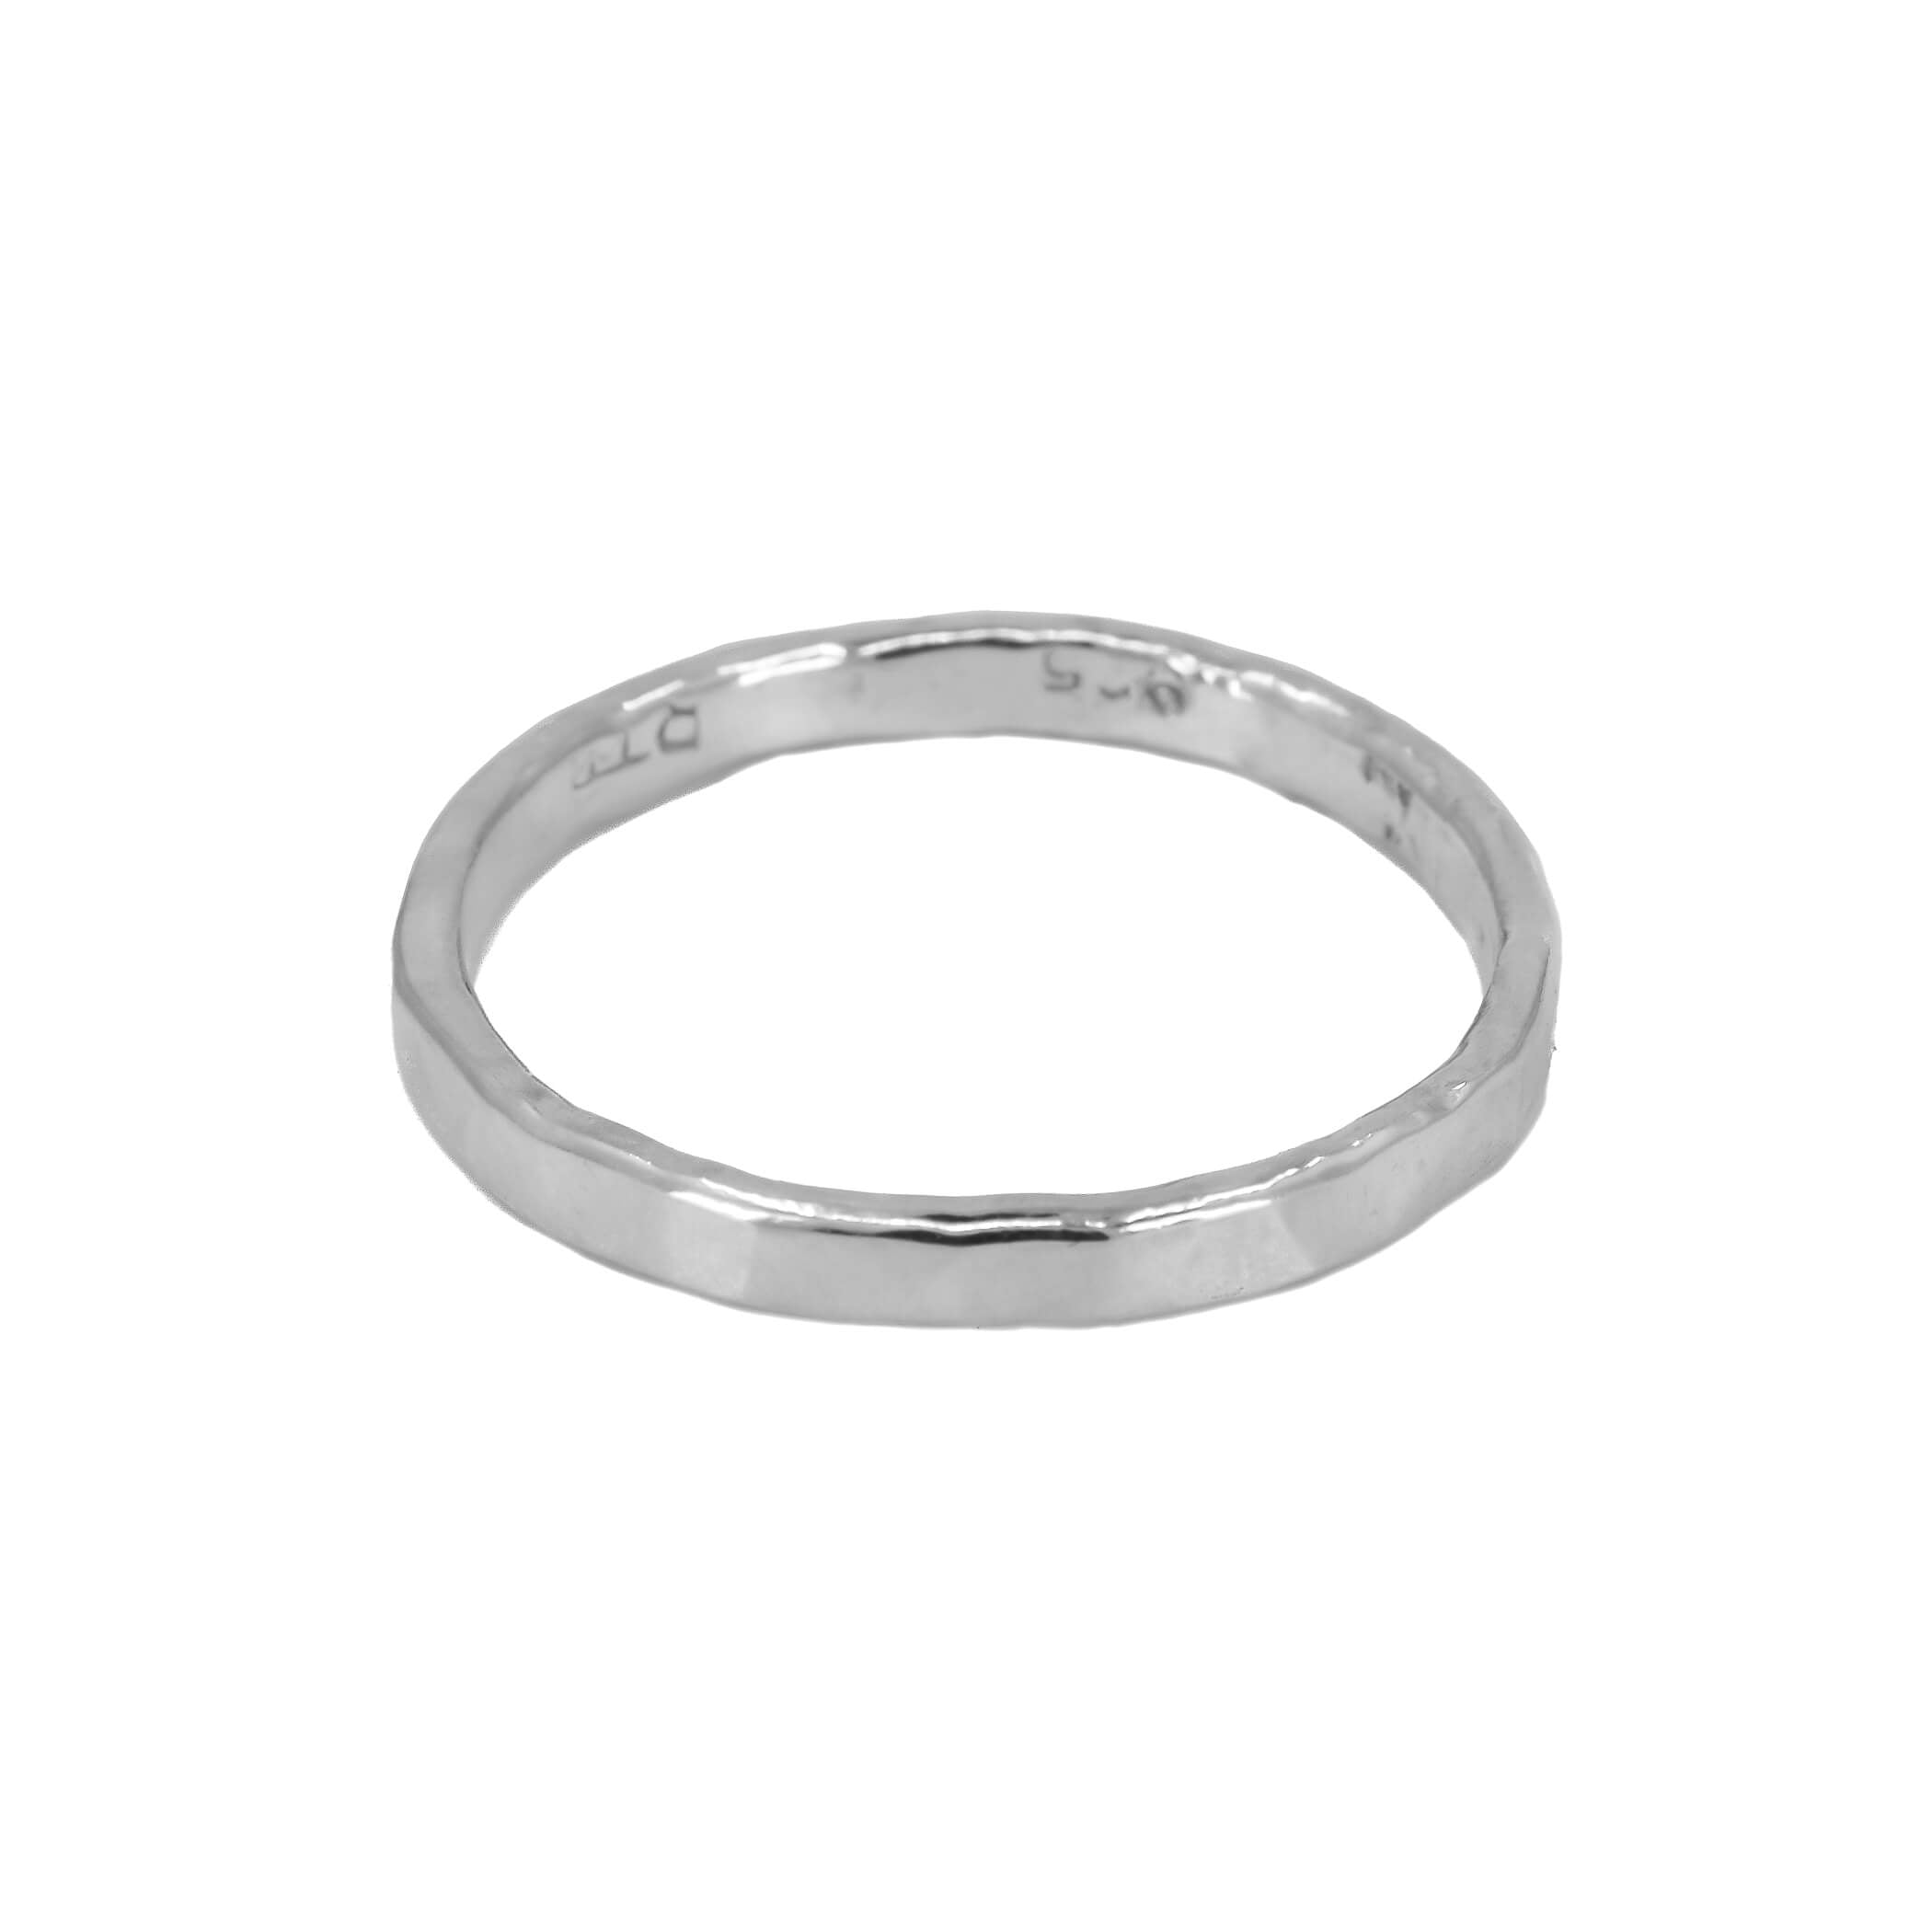 Faceted stacking ring in sterling silver laying down